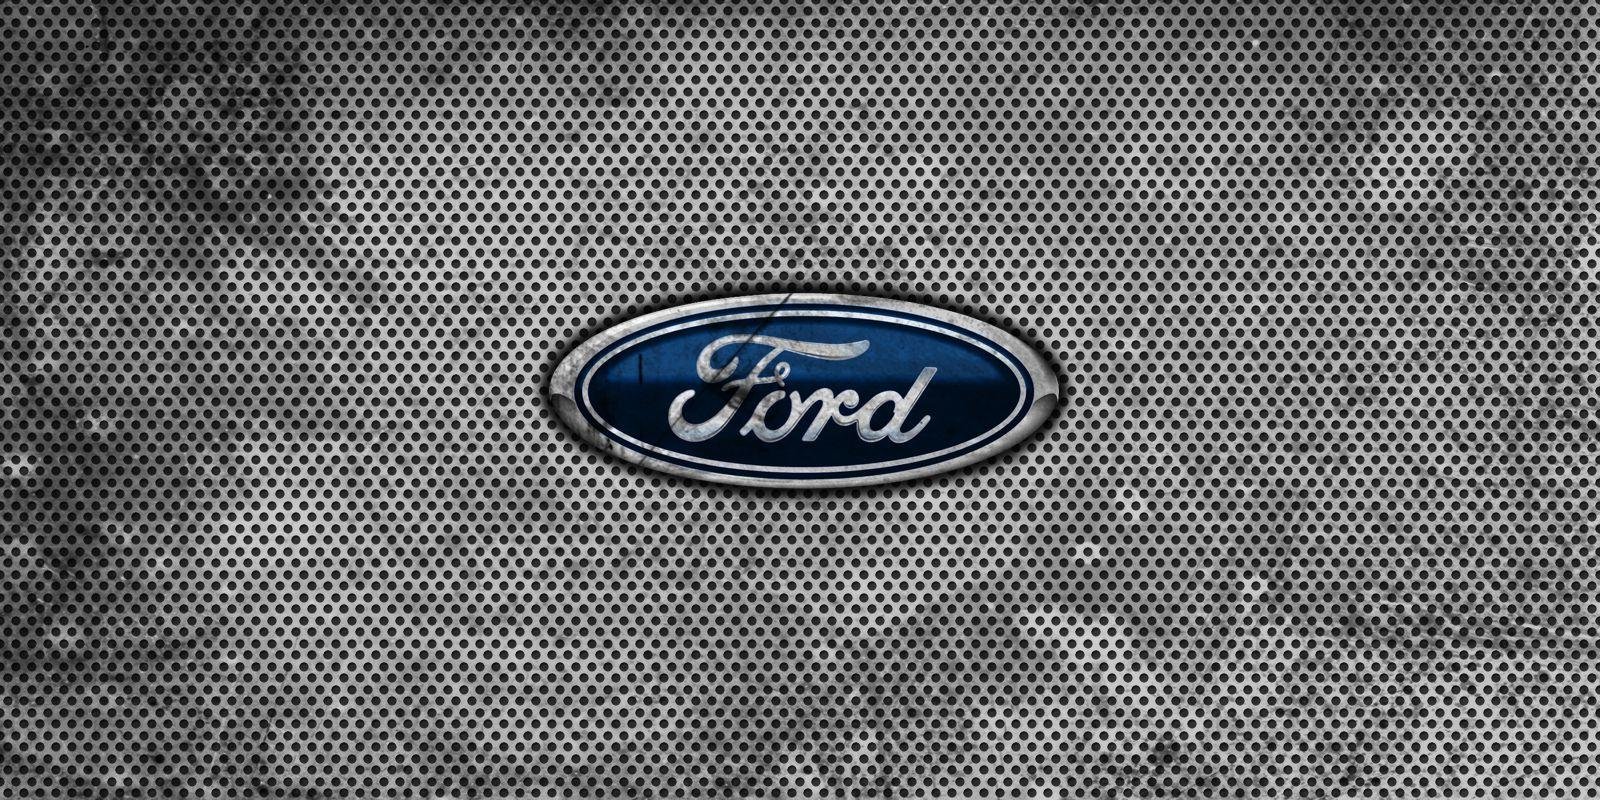 Girly Ford Logo - Ford Logo, Ford Car Symbol Meaning and History | Car Brand Names.com